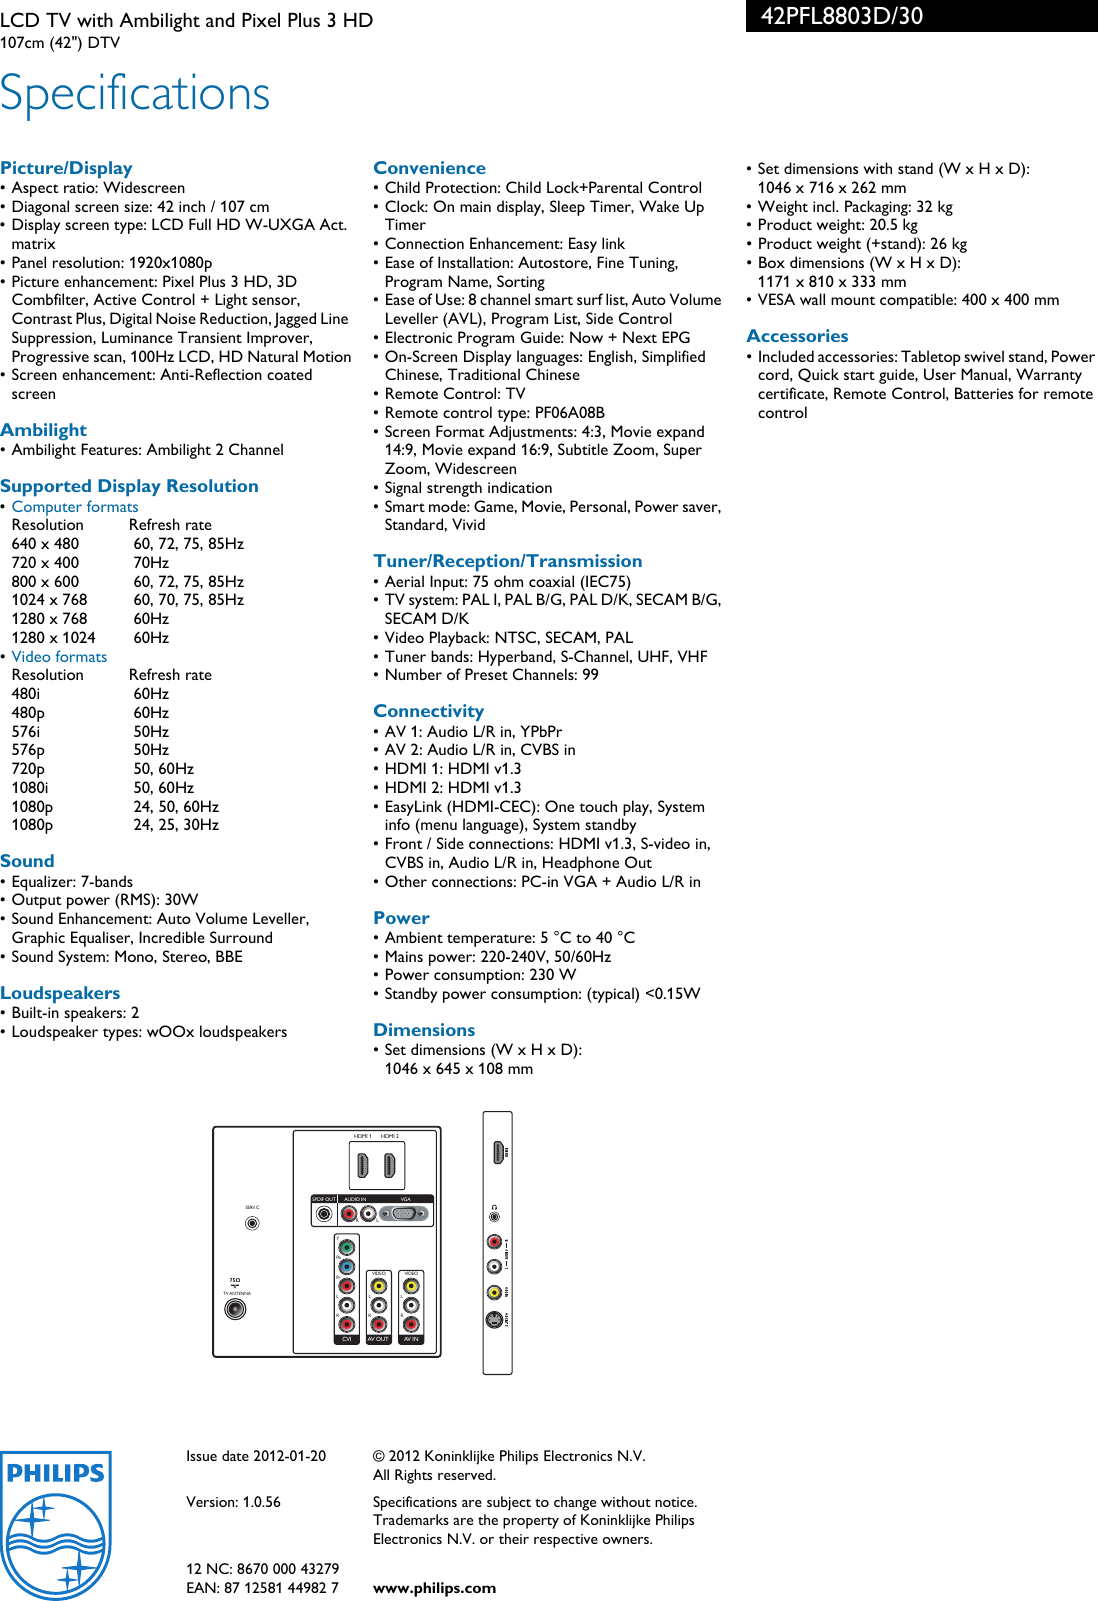 Page 3 of 3 - Philips 42PFL8803D/30 LCD TV With Ambilight And Pixel Plus 3 HD User Manual Leaflet 42pfl8803d 30 Pss Aenhk